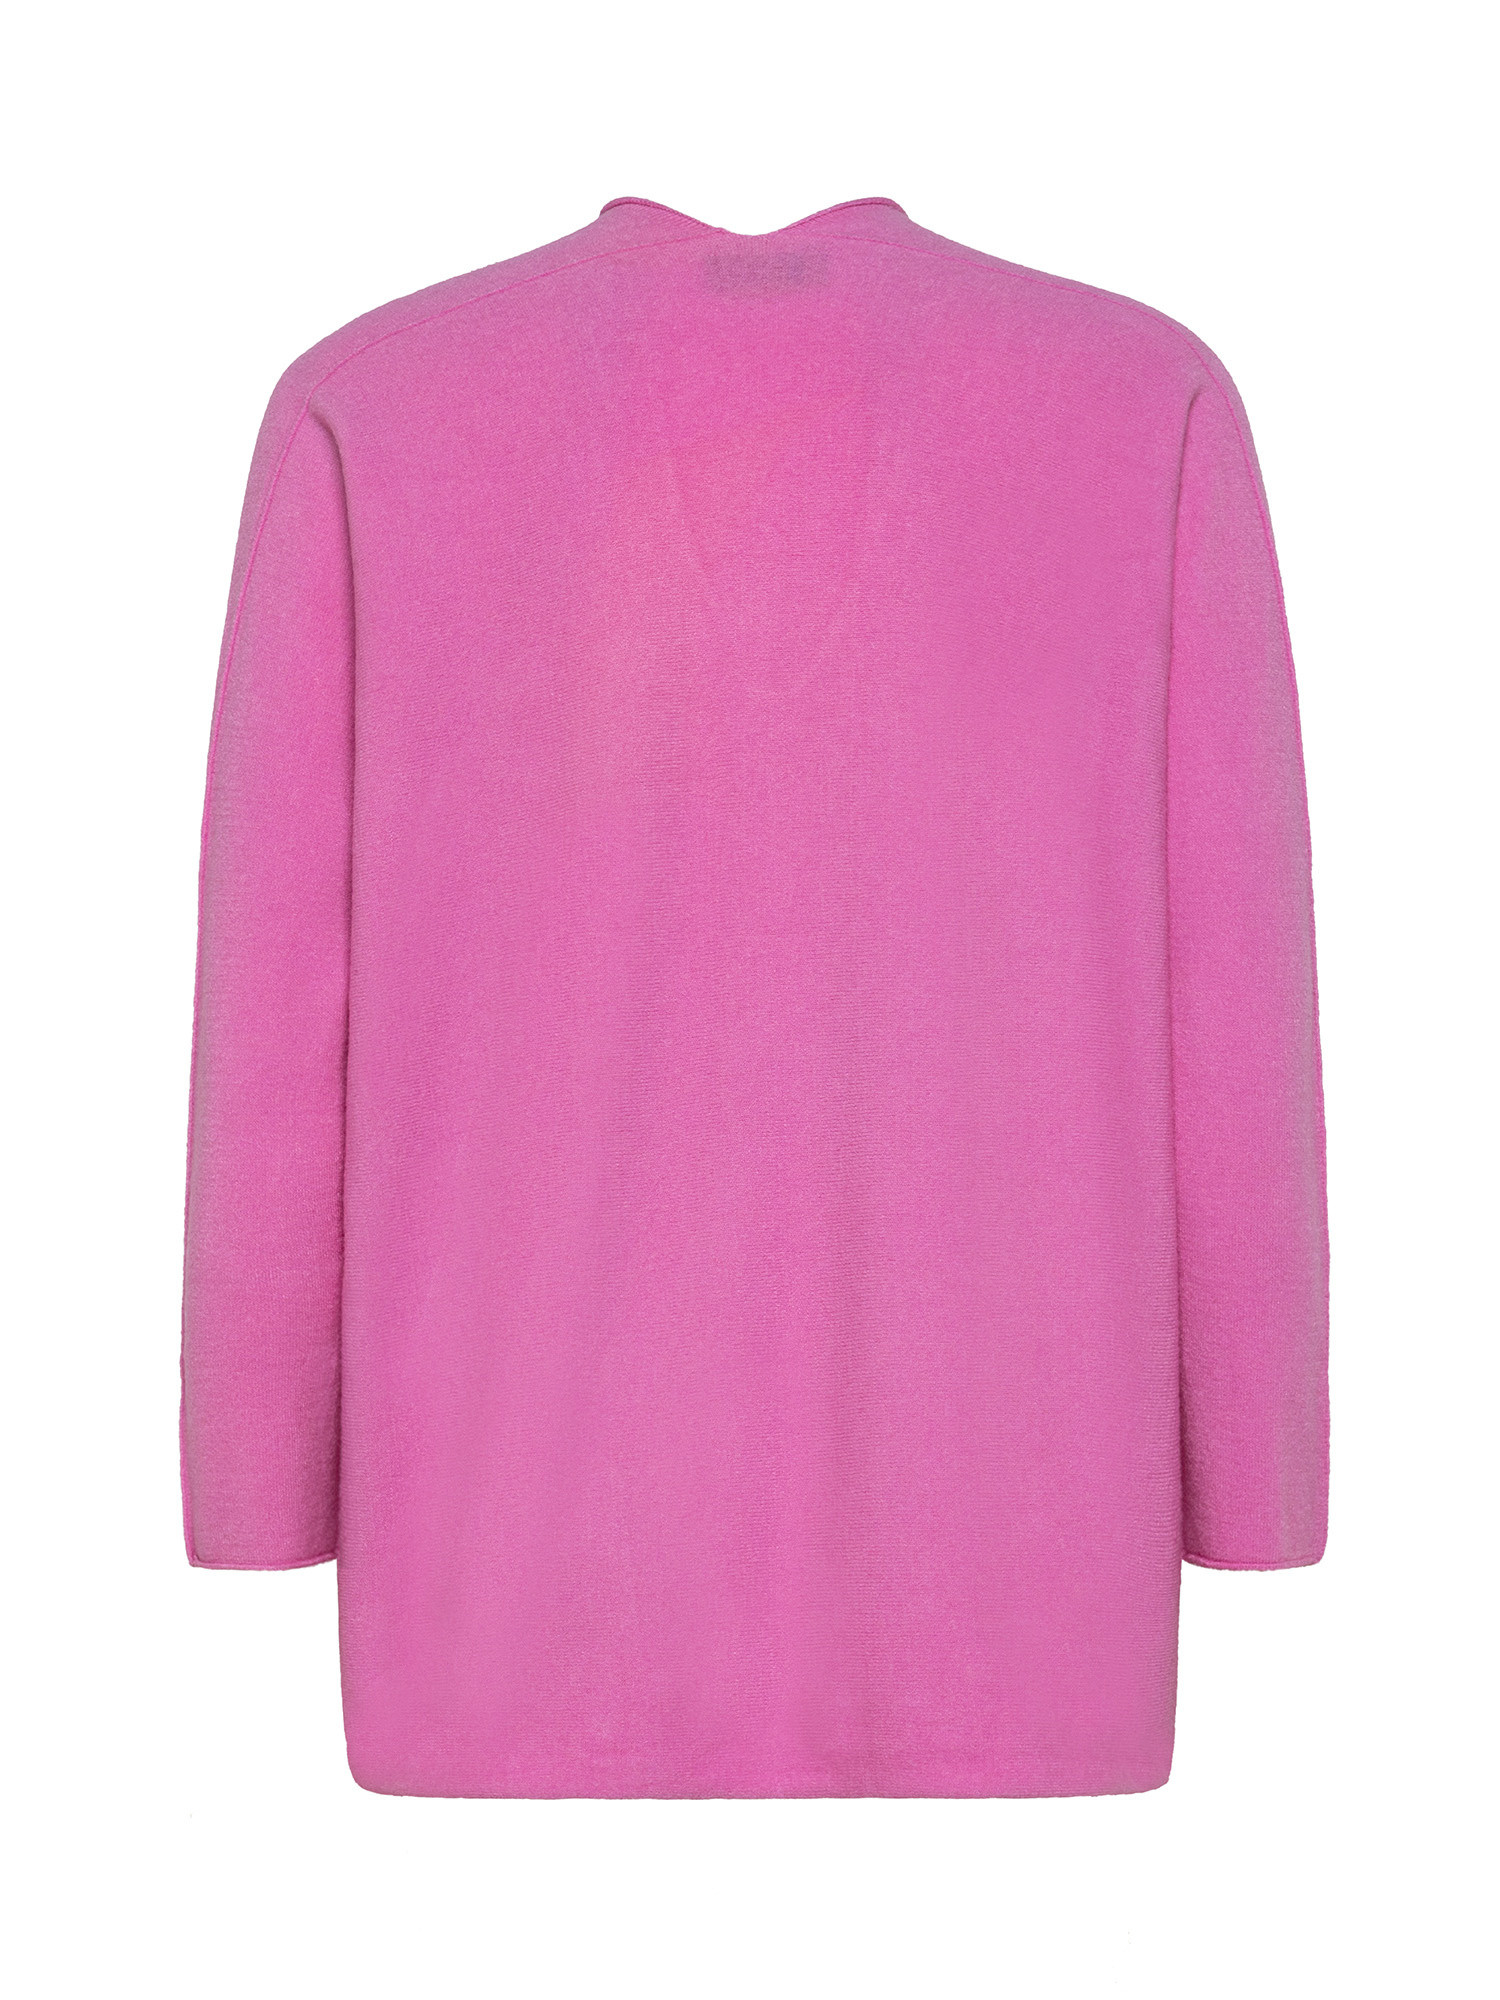 K Collection - Pullover, Rosa fuxia, large image number 1